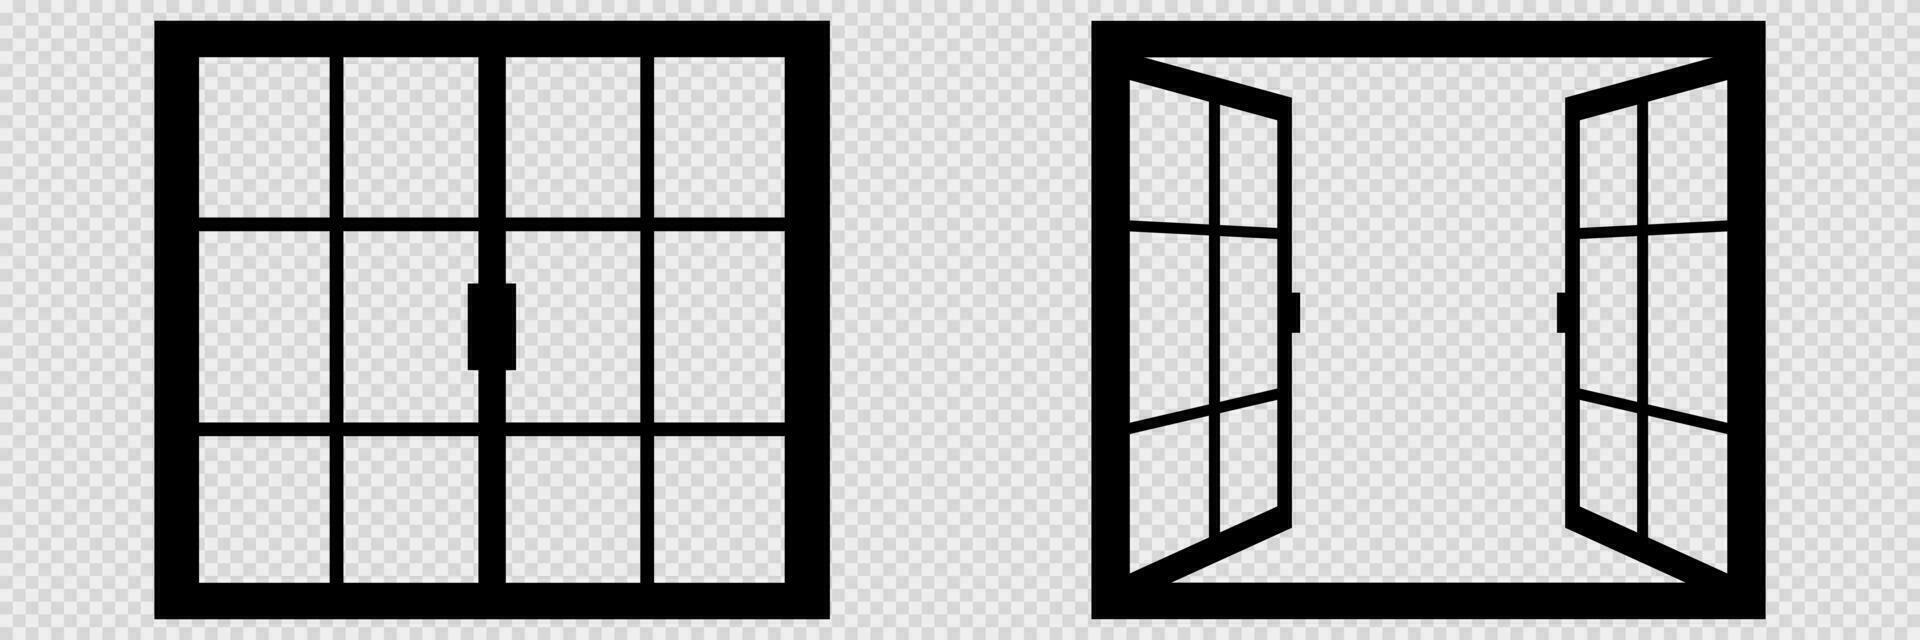 Closed and open window on transparent background. Isolated thin window in black color. Silhouette of empty rectangular border. Classic concept of interior. Vector illustration. EPS 10.